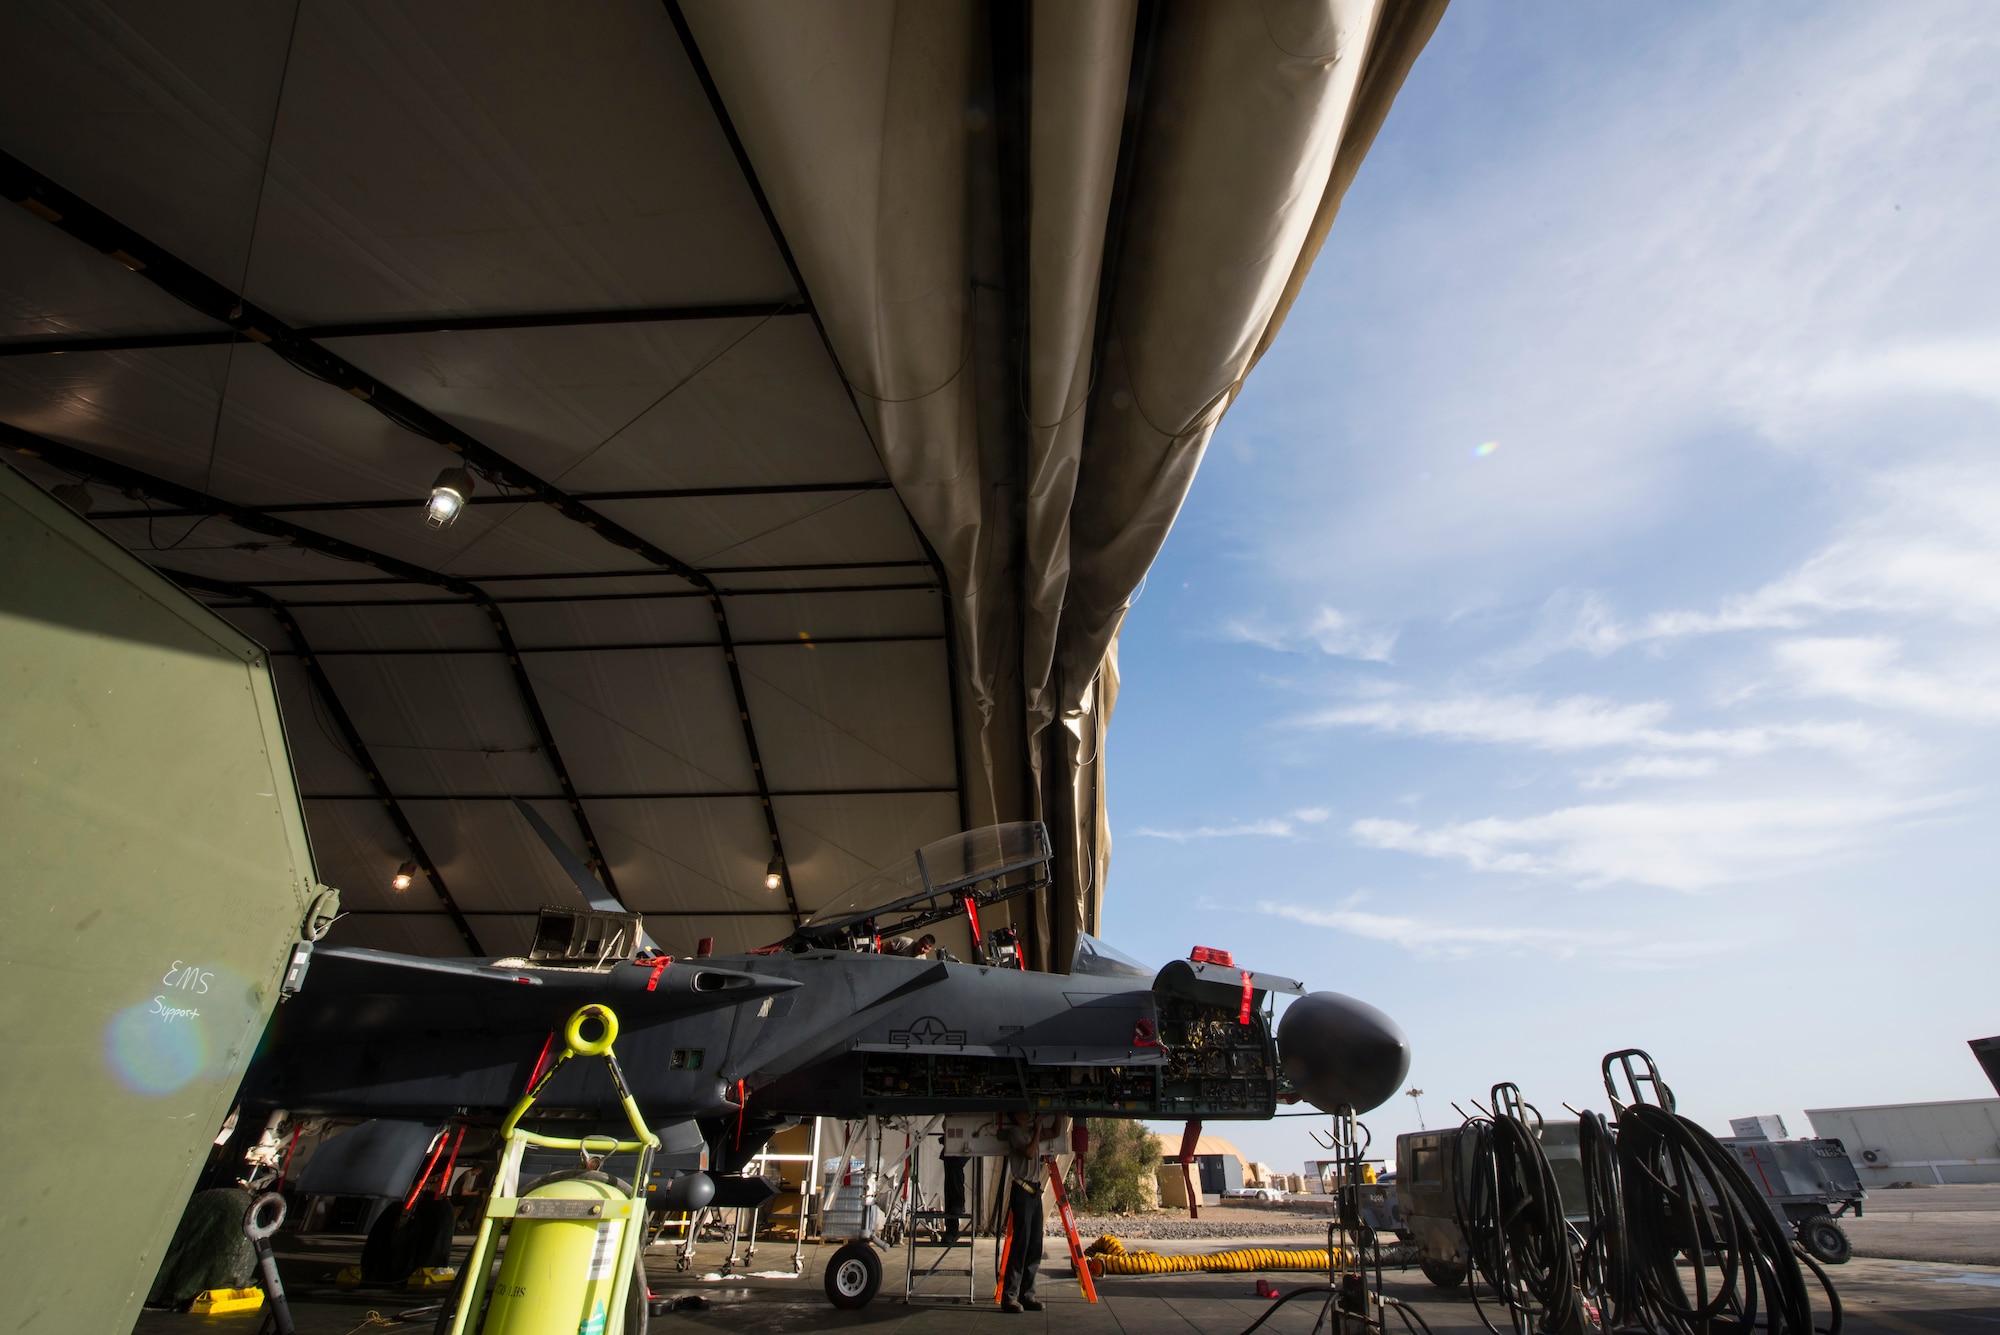 An F-15E Strike Eagle assigned to the 336th Expeditionary Fighter Squadron undergoes full phase maintenance and inspections March 1, 2018, at an undisclosed location. The 336 EFS “Rocketeers,” are deployed from Seymour Johnson Air Force Base, N.C., carrying out close-air support and defensive counter-air mission sets in support of Operation Inherent Resolve. (U.S. Air Force photo by Staff Sgt. Joshua Kleinholz)